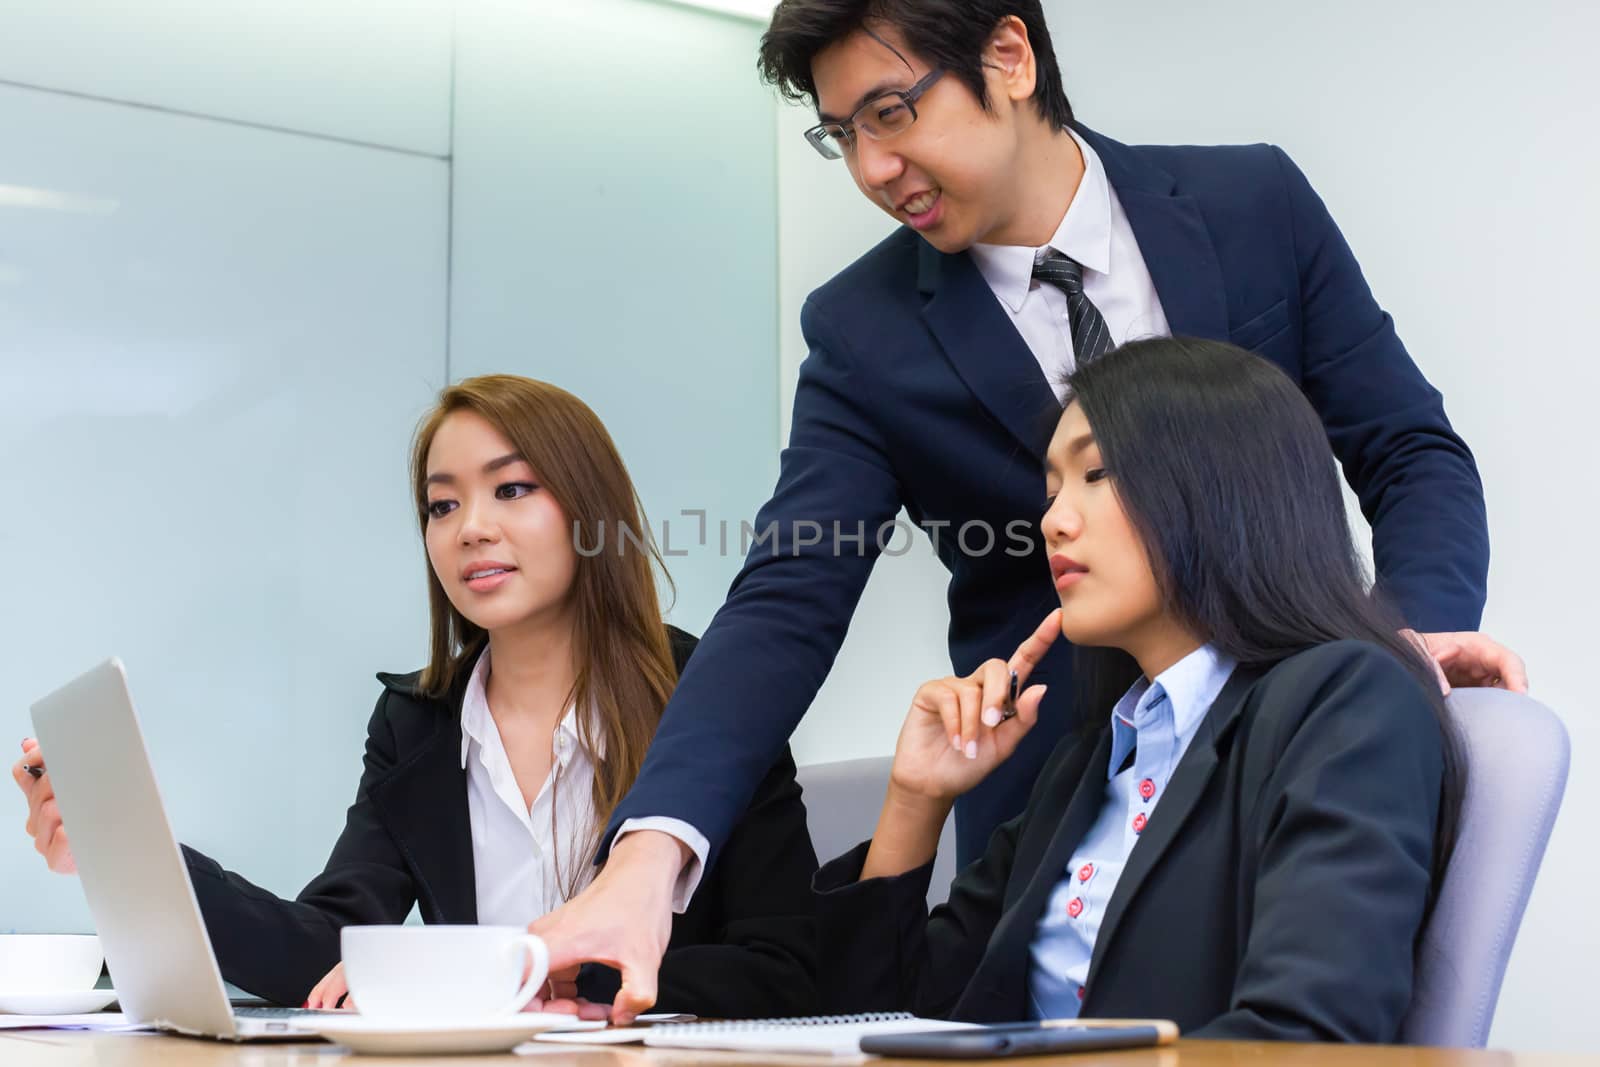 Asian business people make a group discussion in meeting room by pattierstock